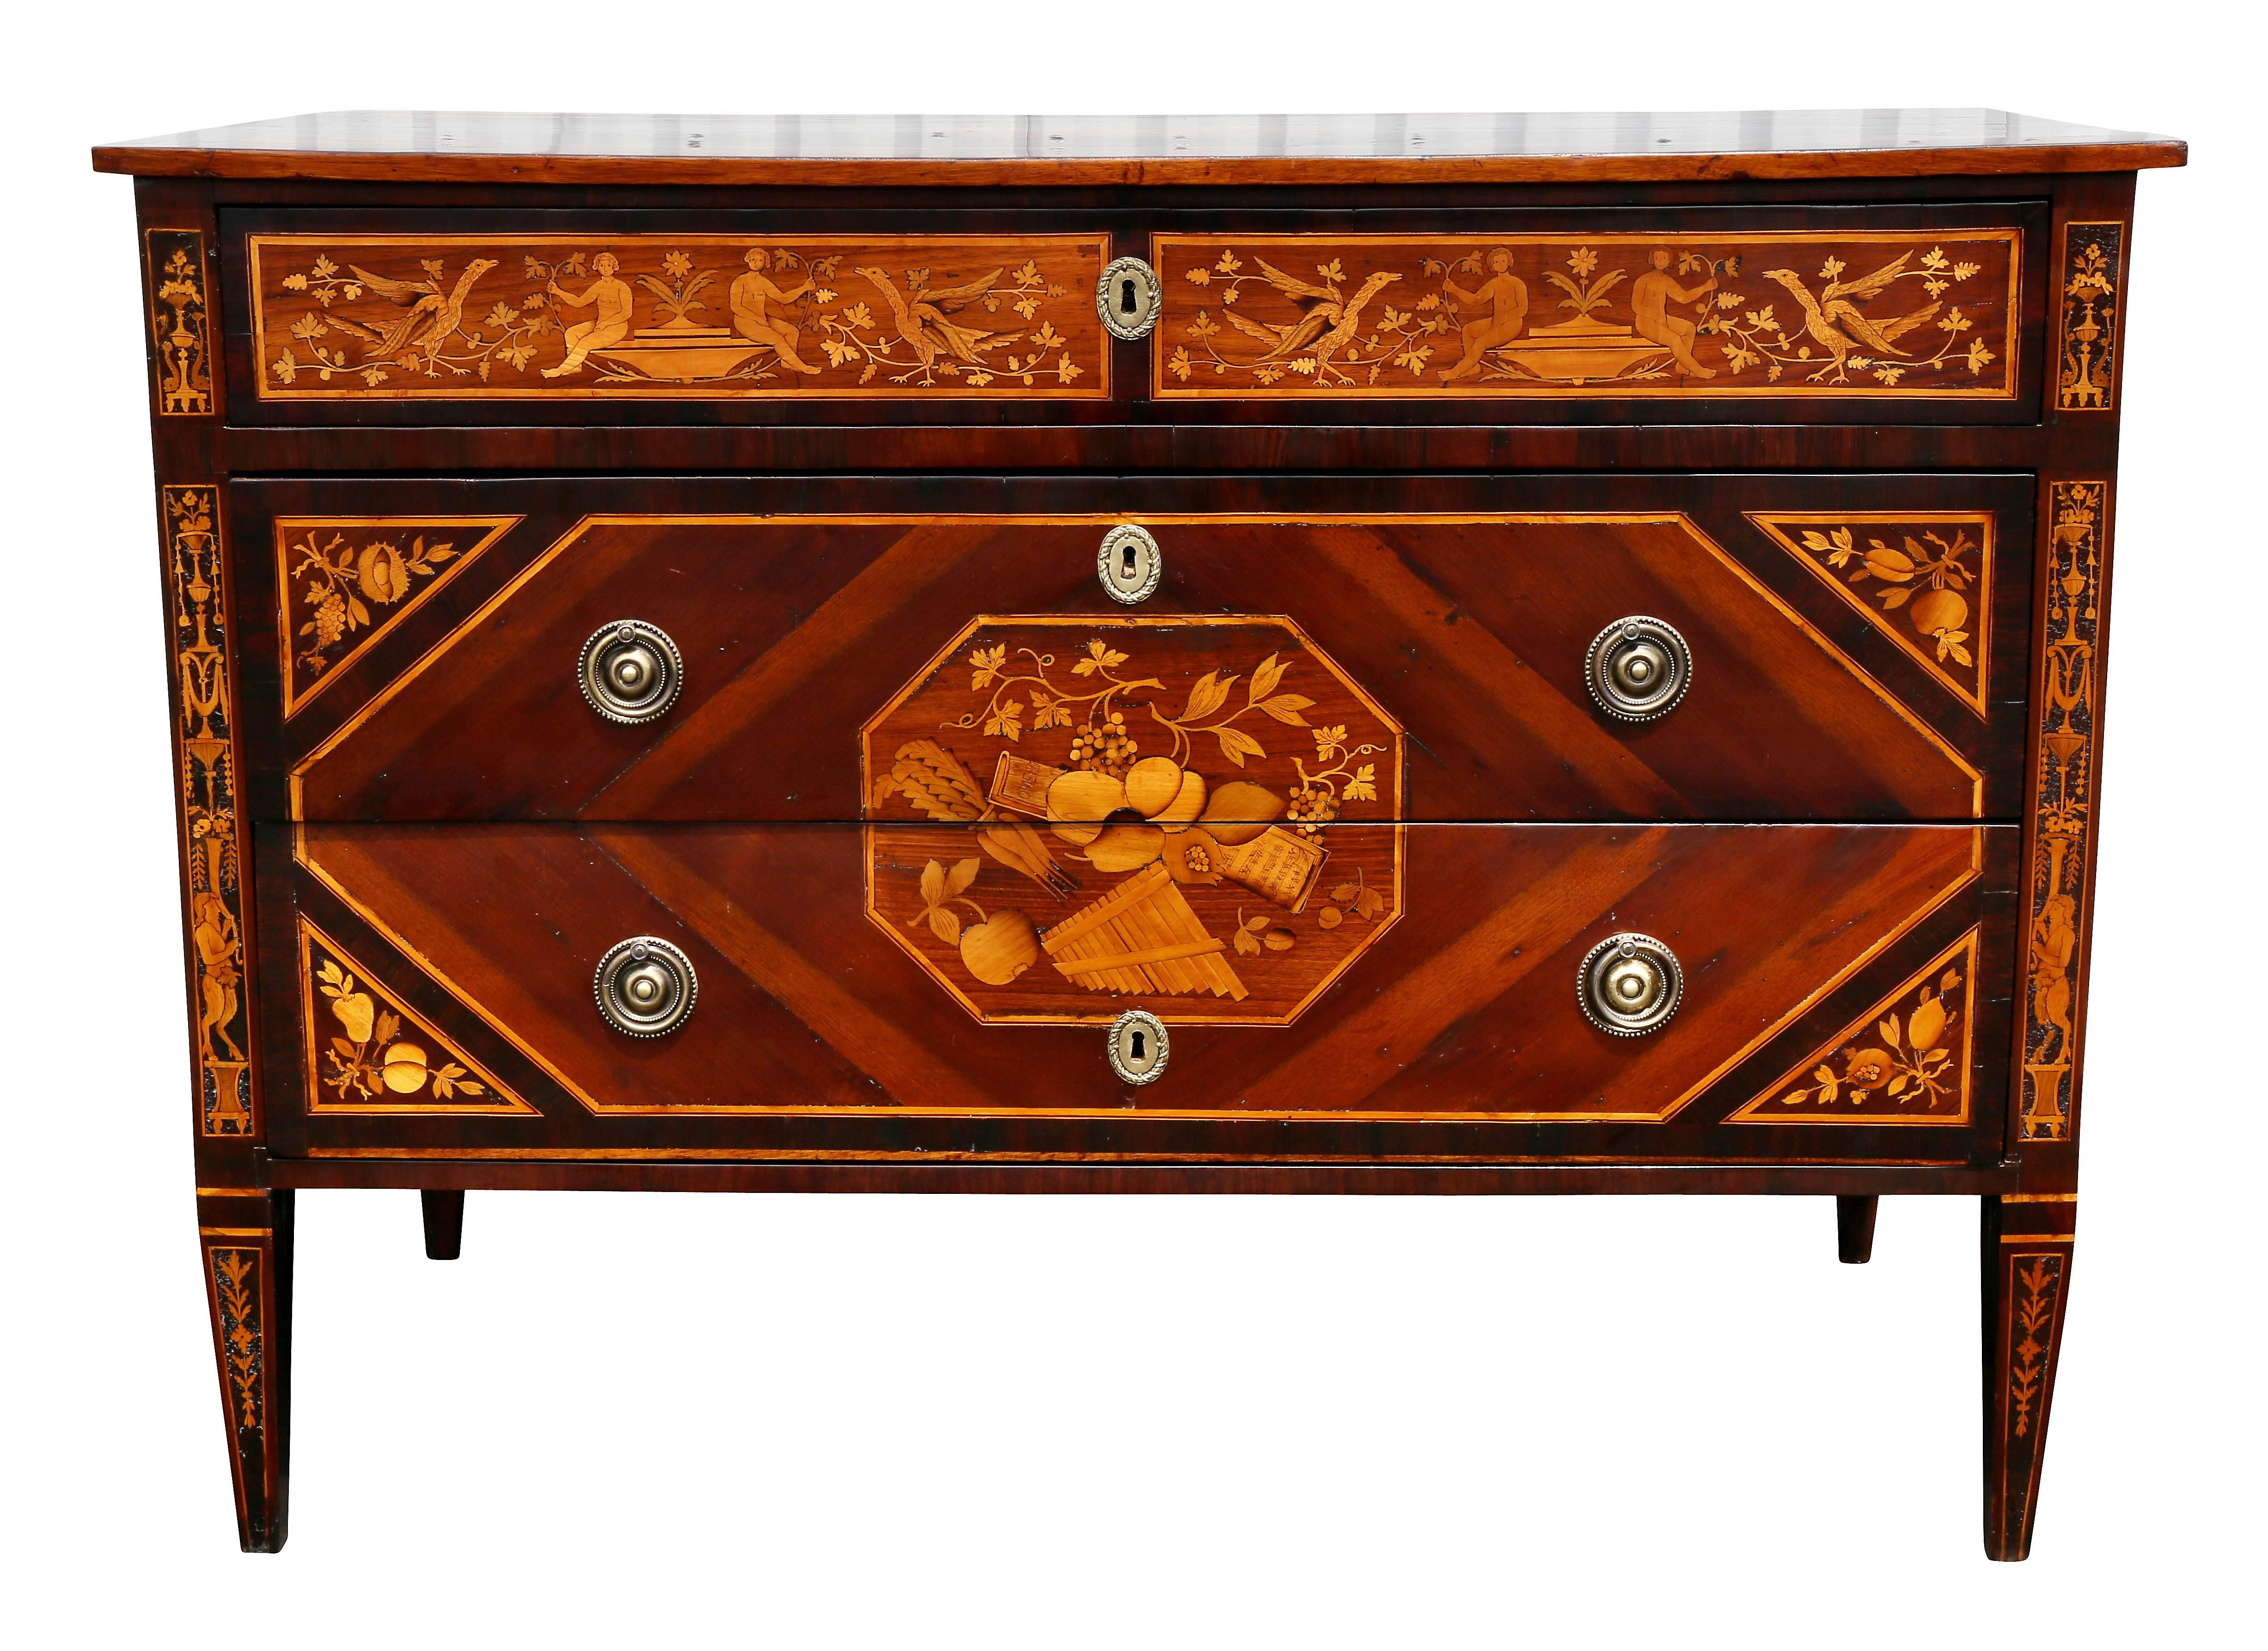 With rectangular top with central inlay of a bowl with flowers over a conforming case with one drawer over a pair of drawers sans - traverse. Beautifully inlaid with figures and trophies.